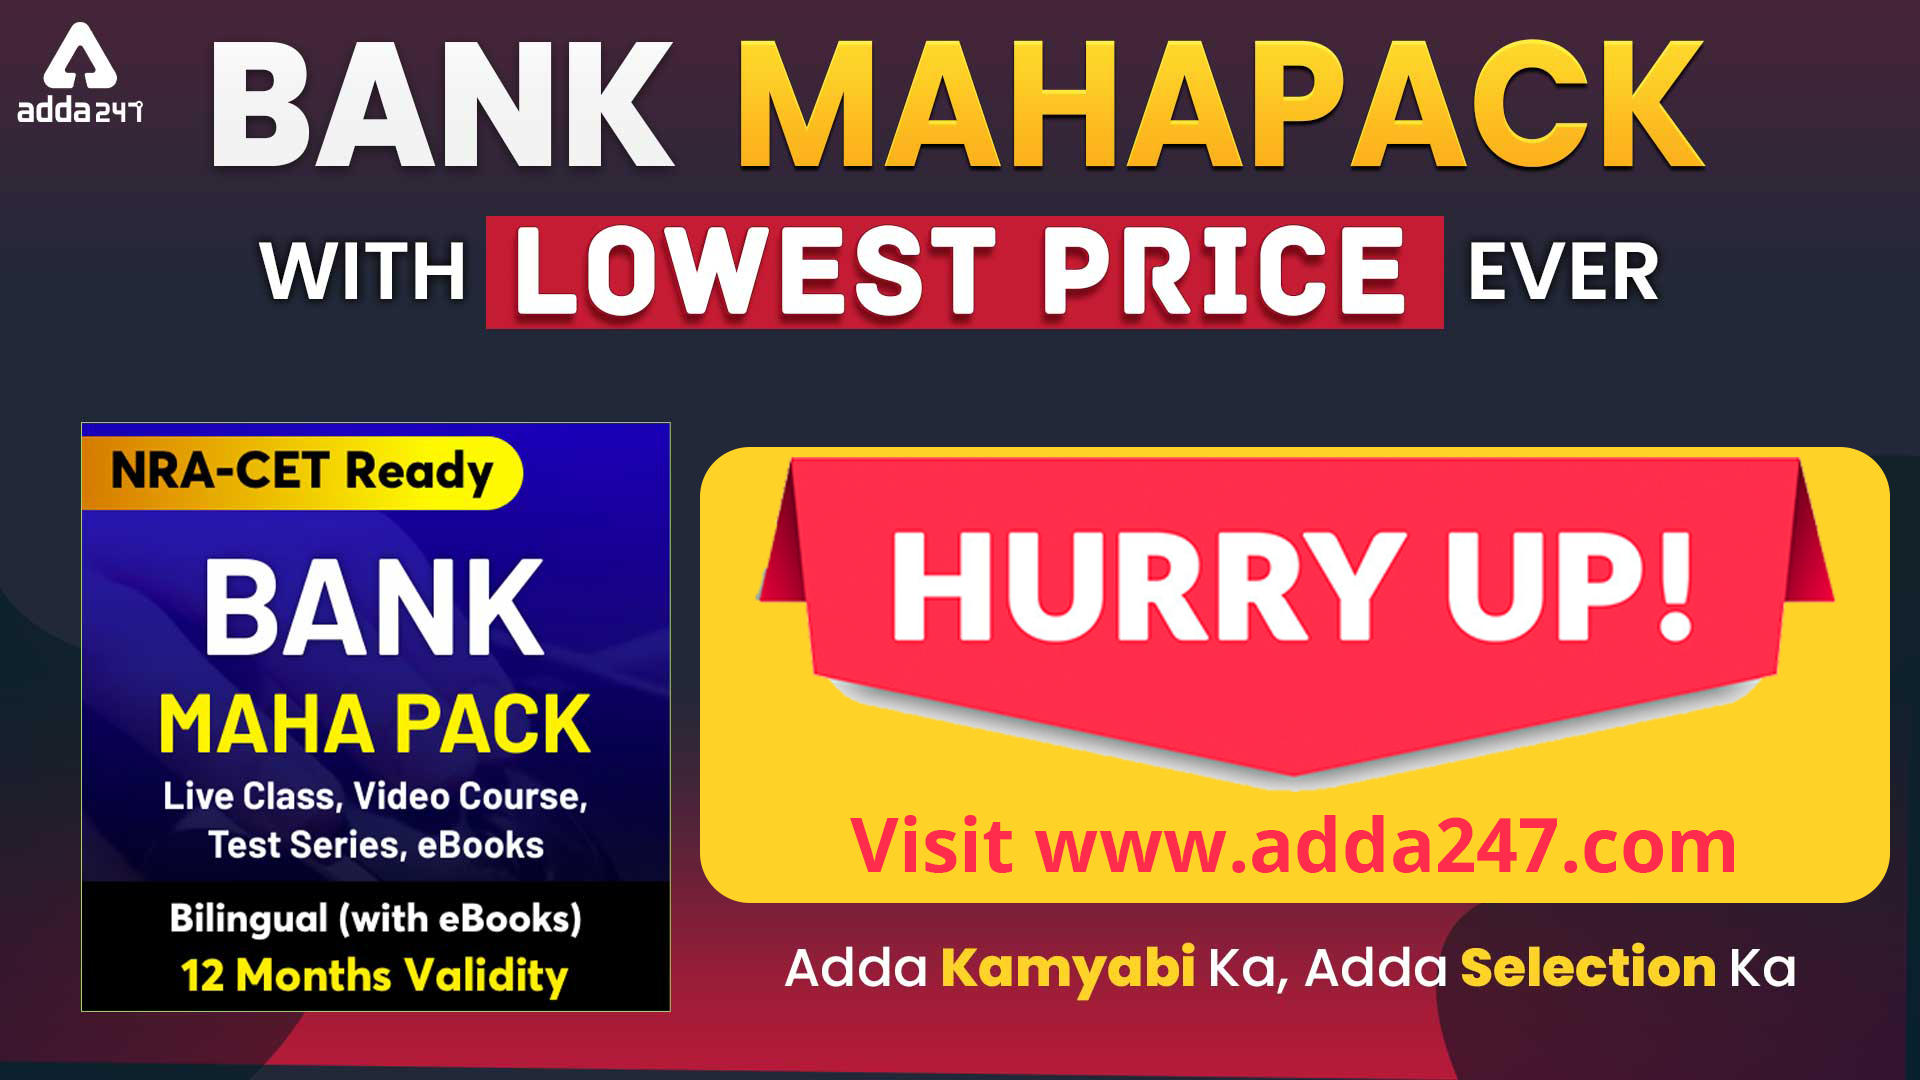 Prepare for Banking Exams 2021 with Adda247, Get Bank Mahapack at Lowest Ever Prices | Offer Valid for Today_40.1